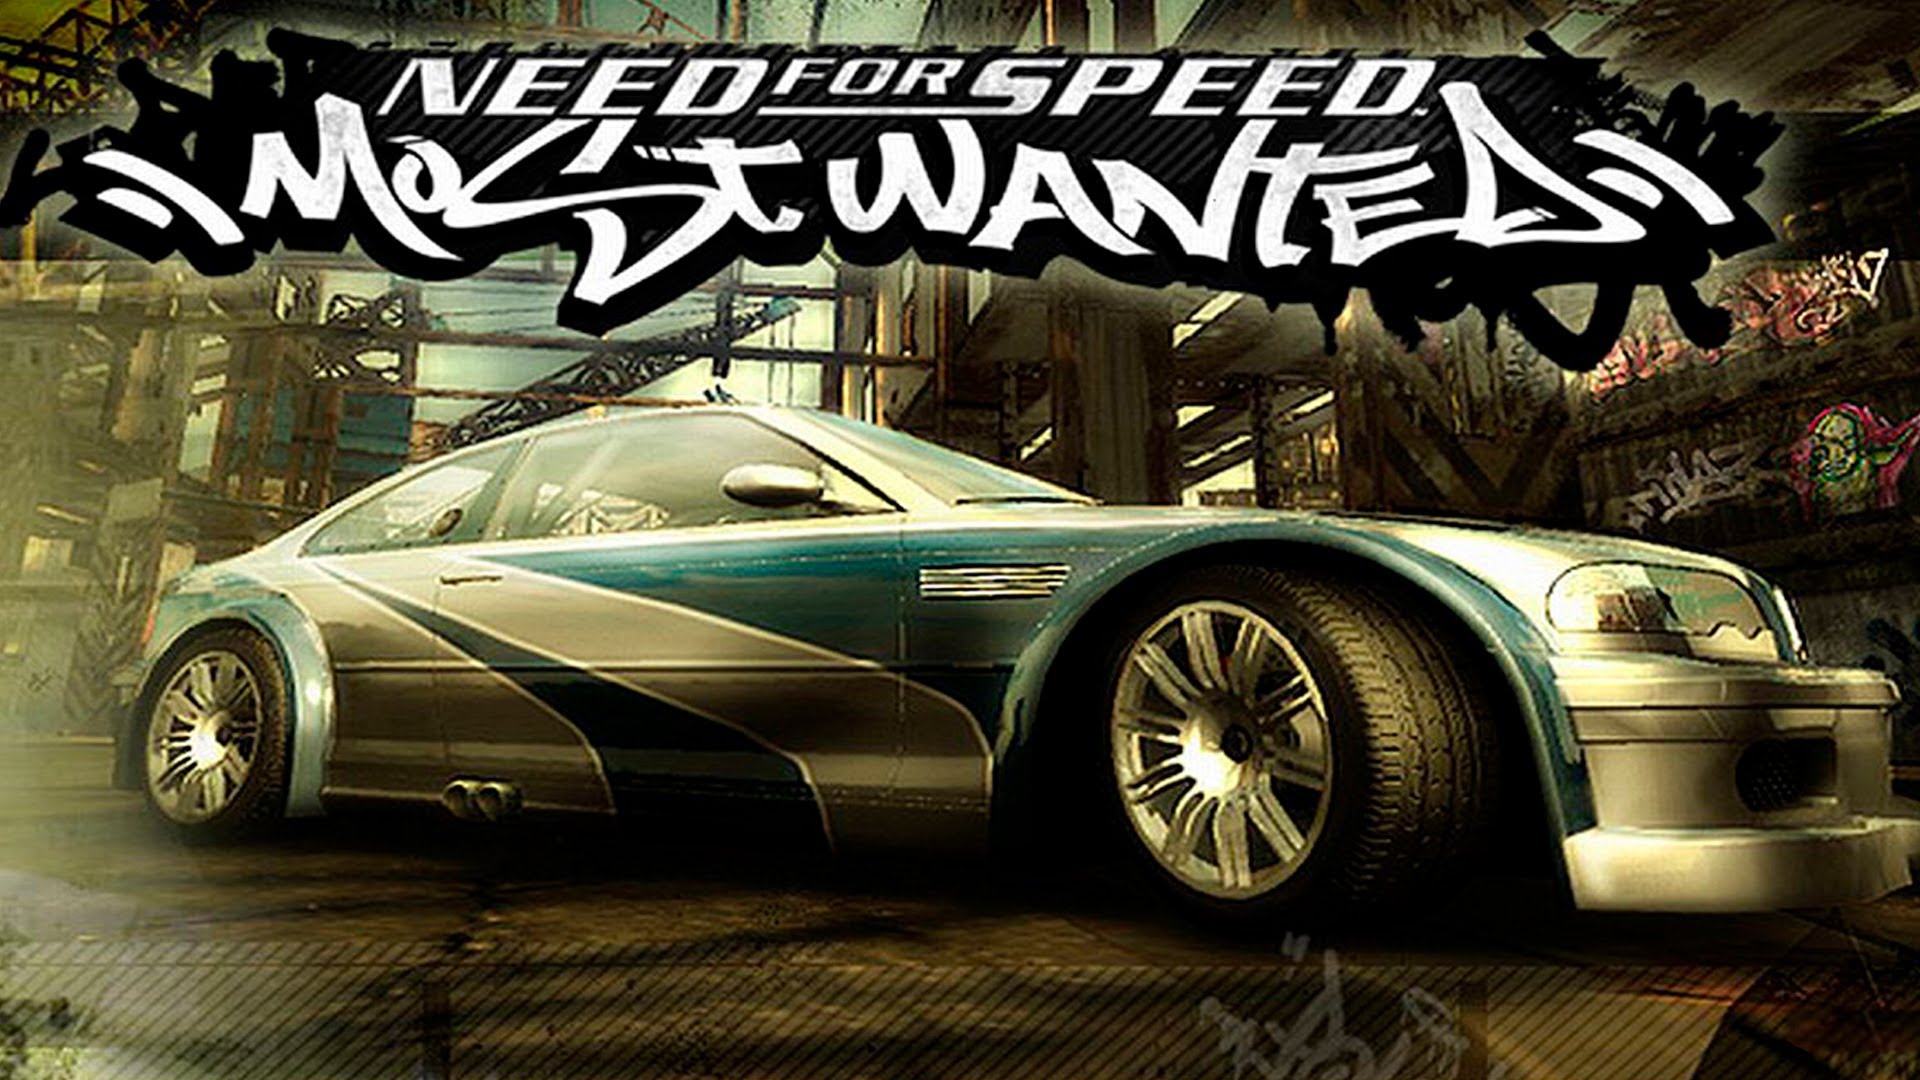 Need For Speed: Most Wanted Backgrounds, Compatible - PC, Mobile, Gadgets| 1920x1080 px